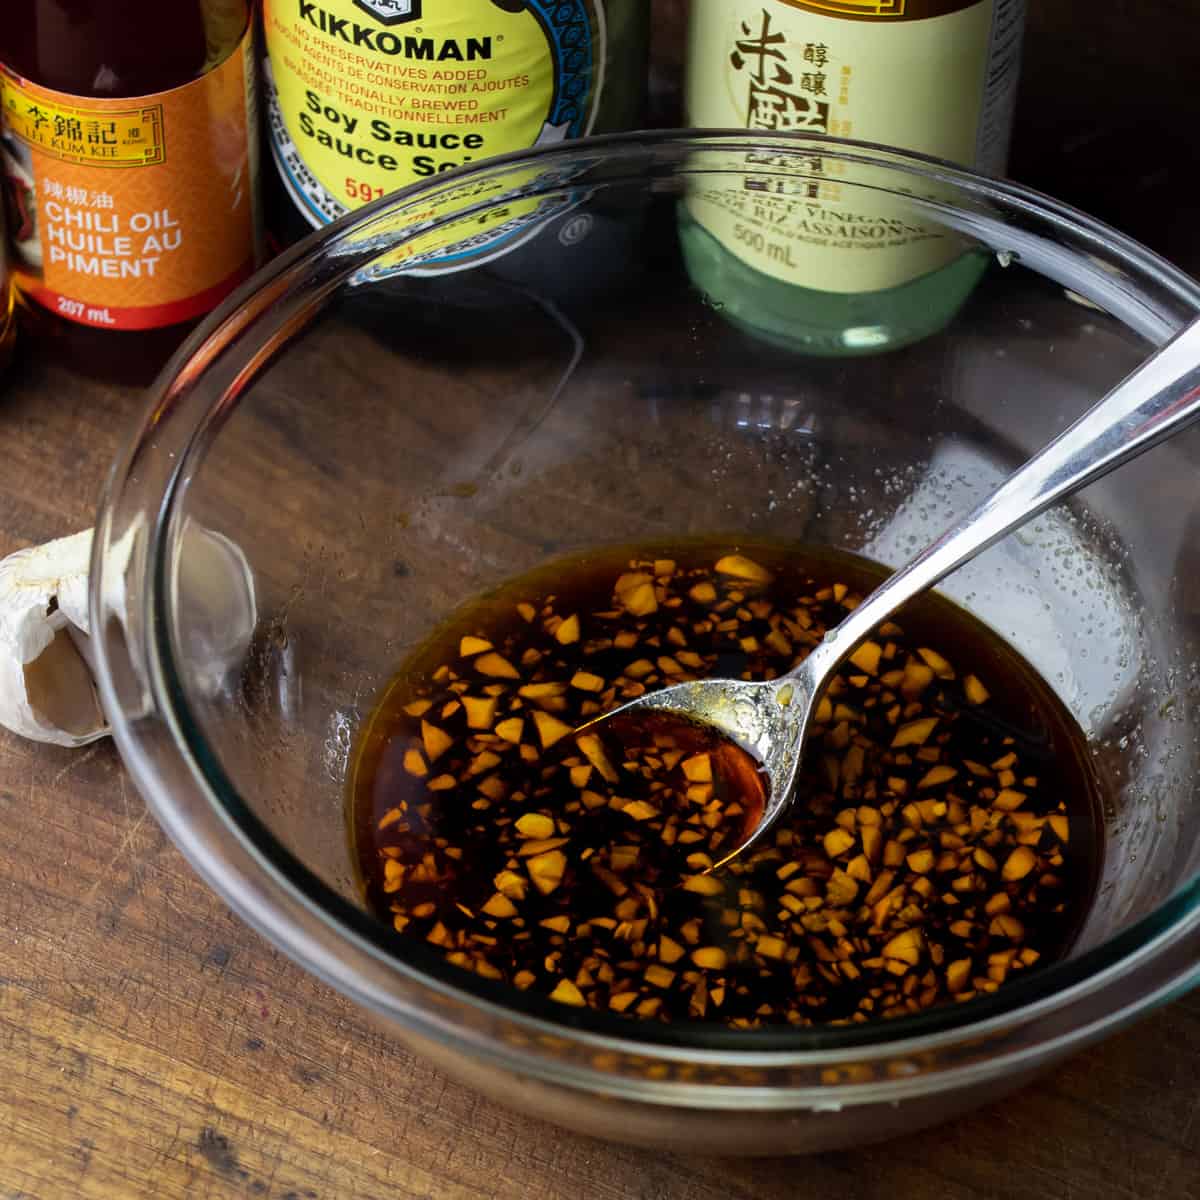 Dipping sauce ingredients added to a glass mixing bowl.